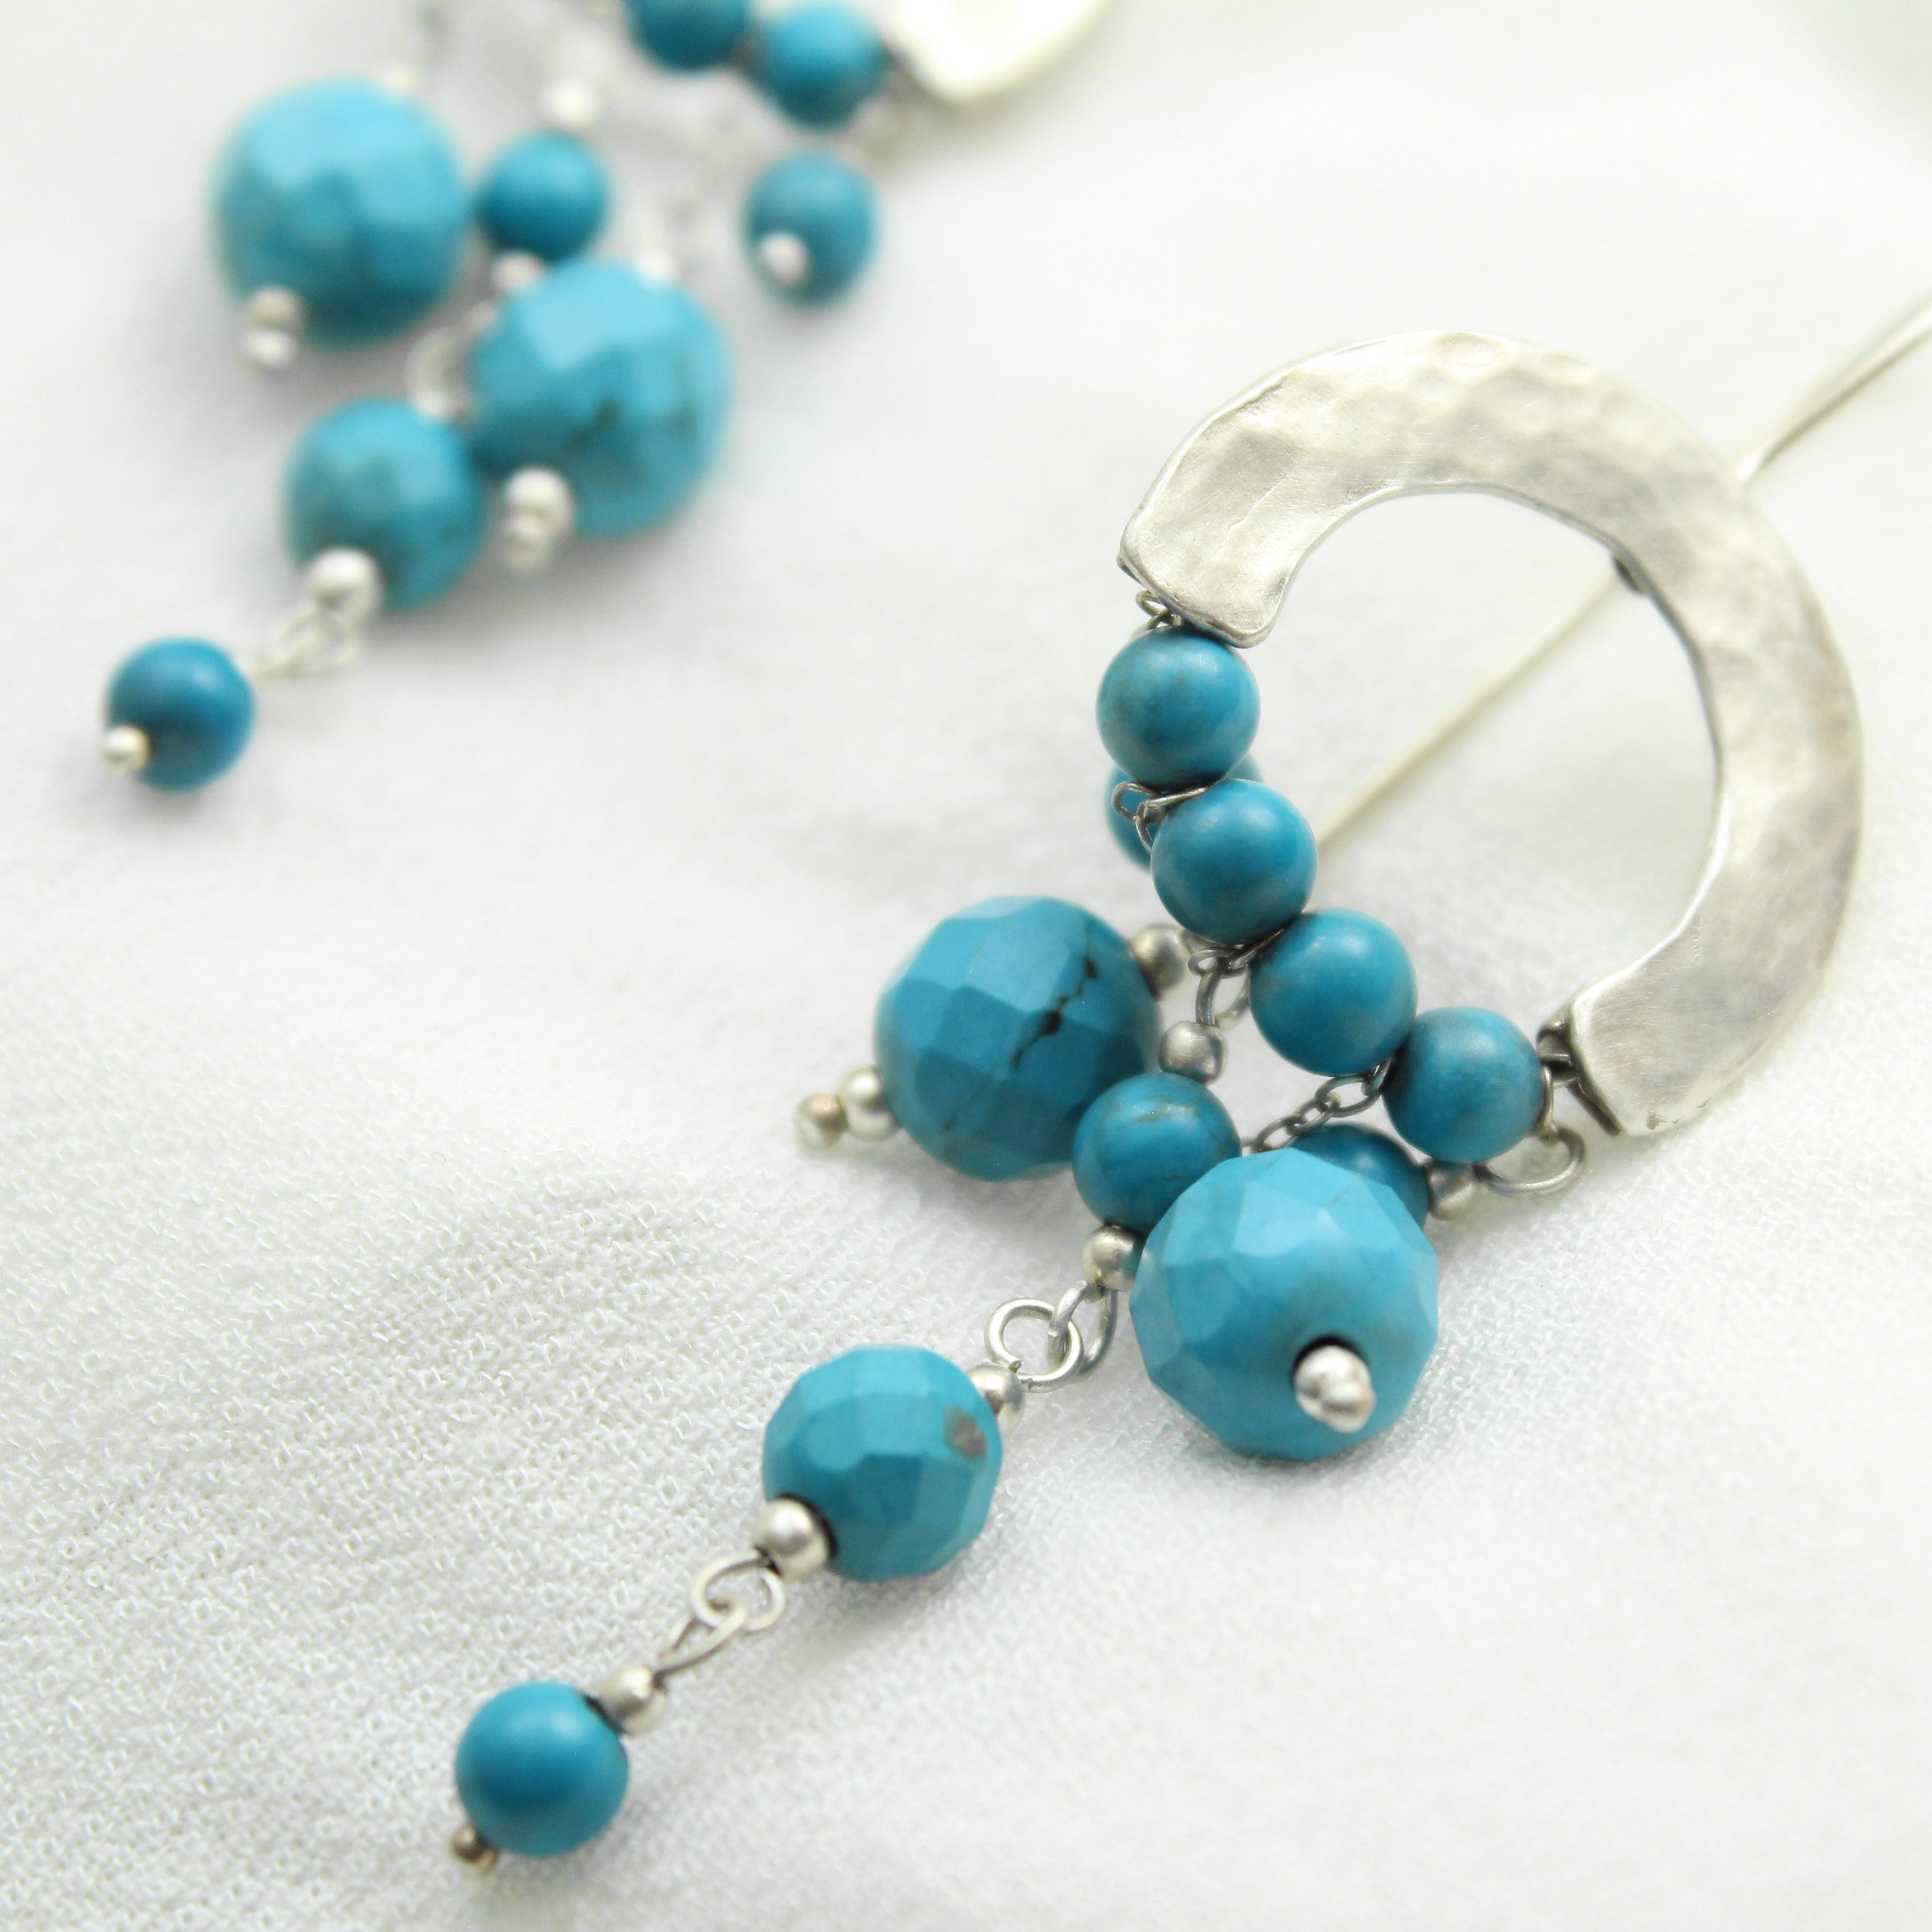 Crescent Moon - Sterling Silver & Turquoise Gemstone Earrings